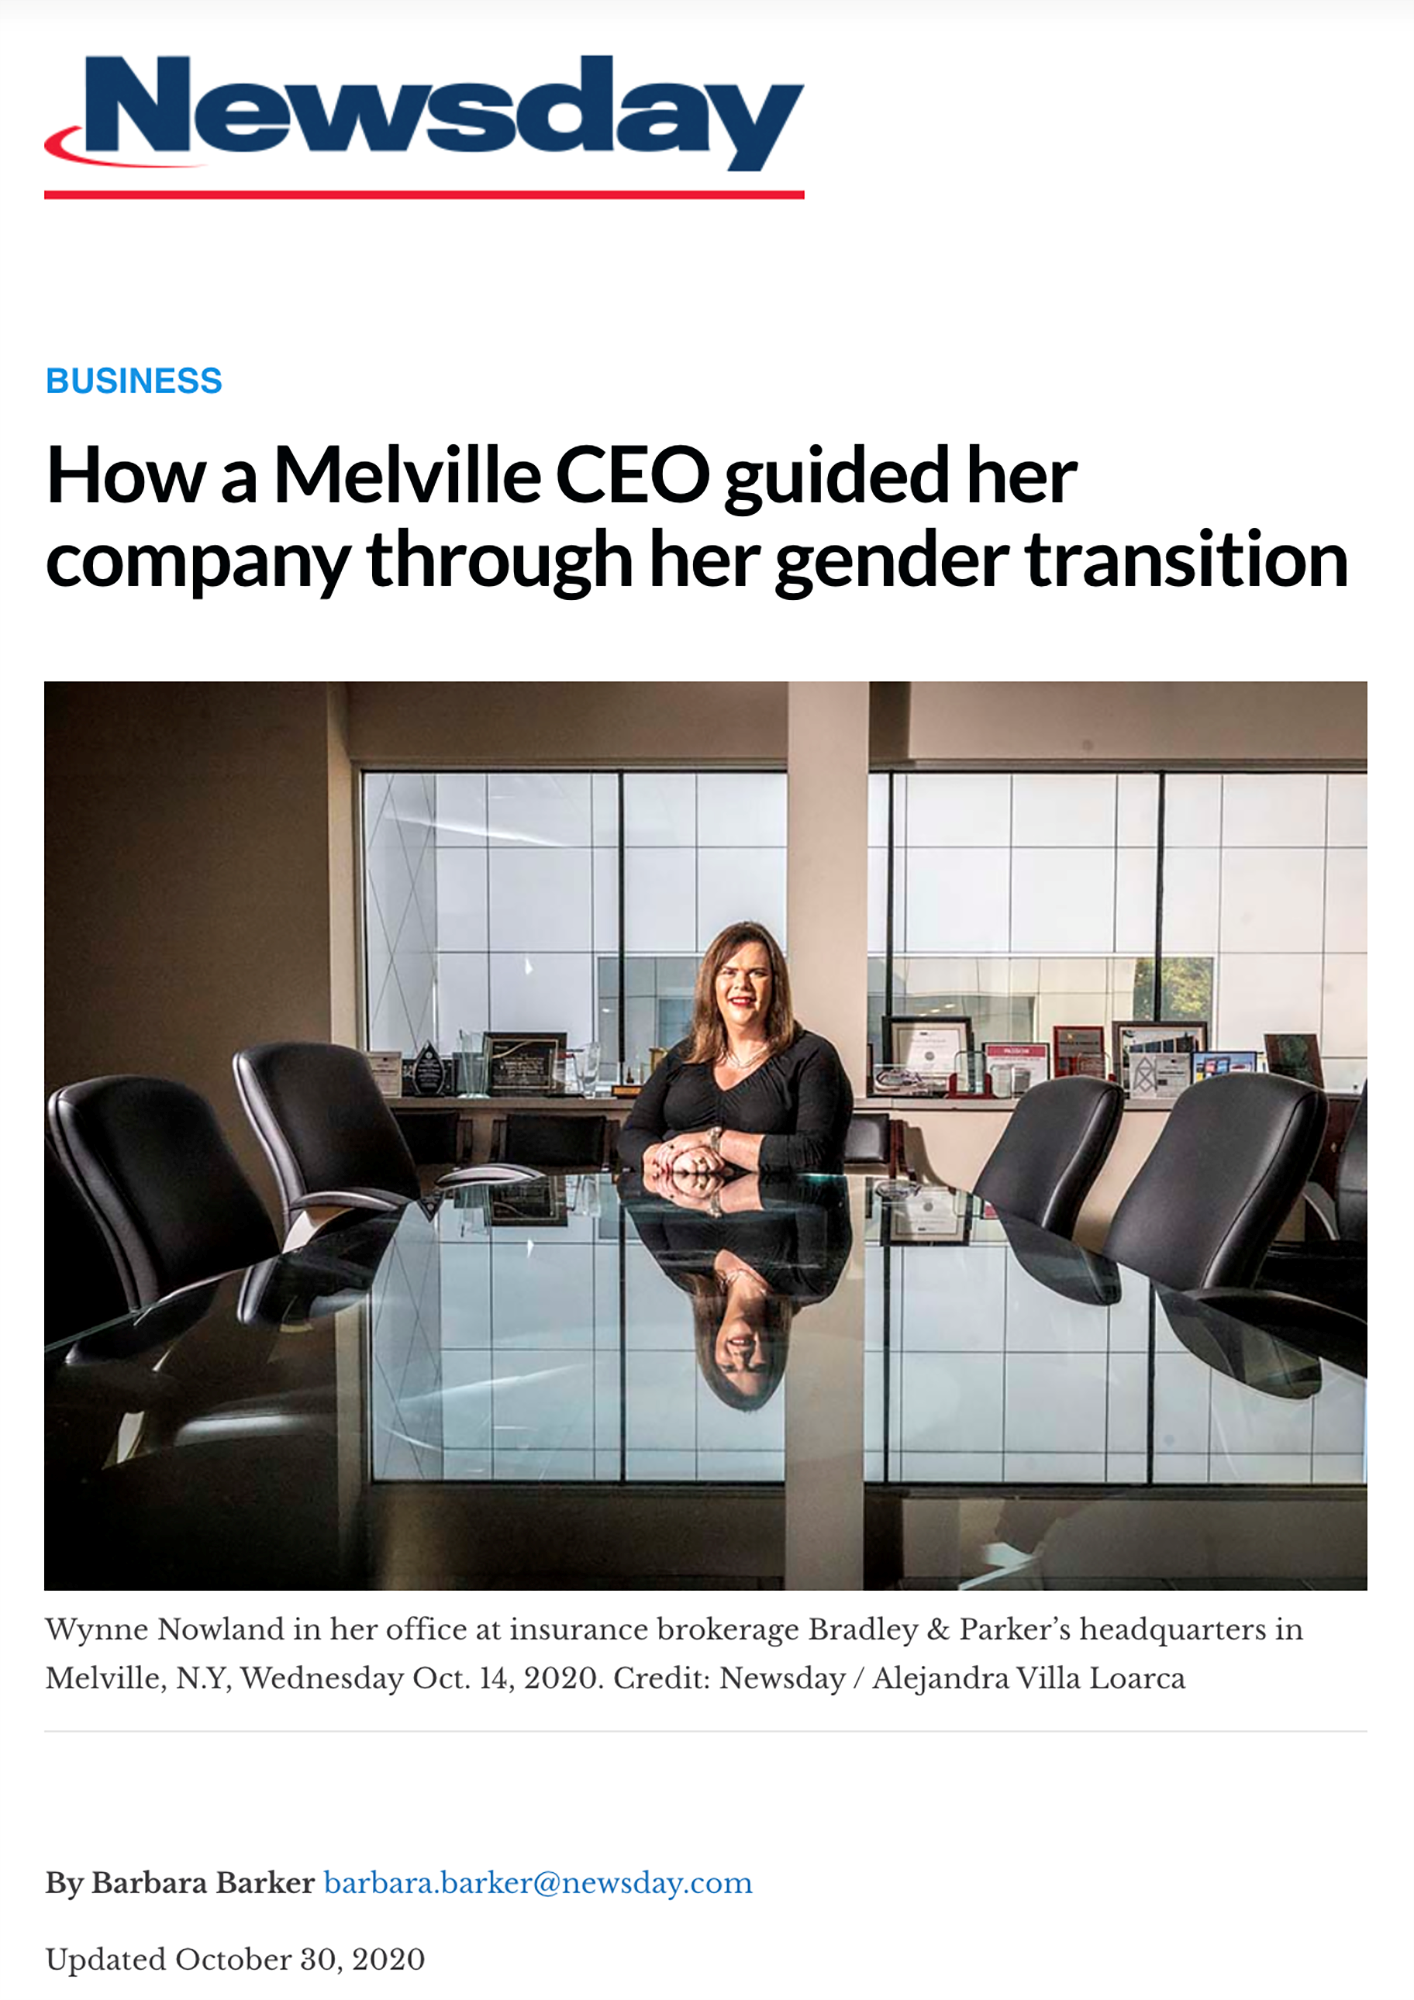 newsday-publishes-feature-article-on-ceo-wynne-nowland